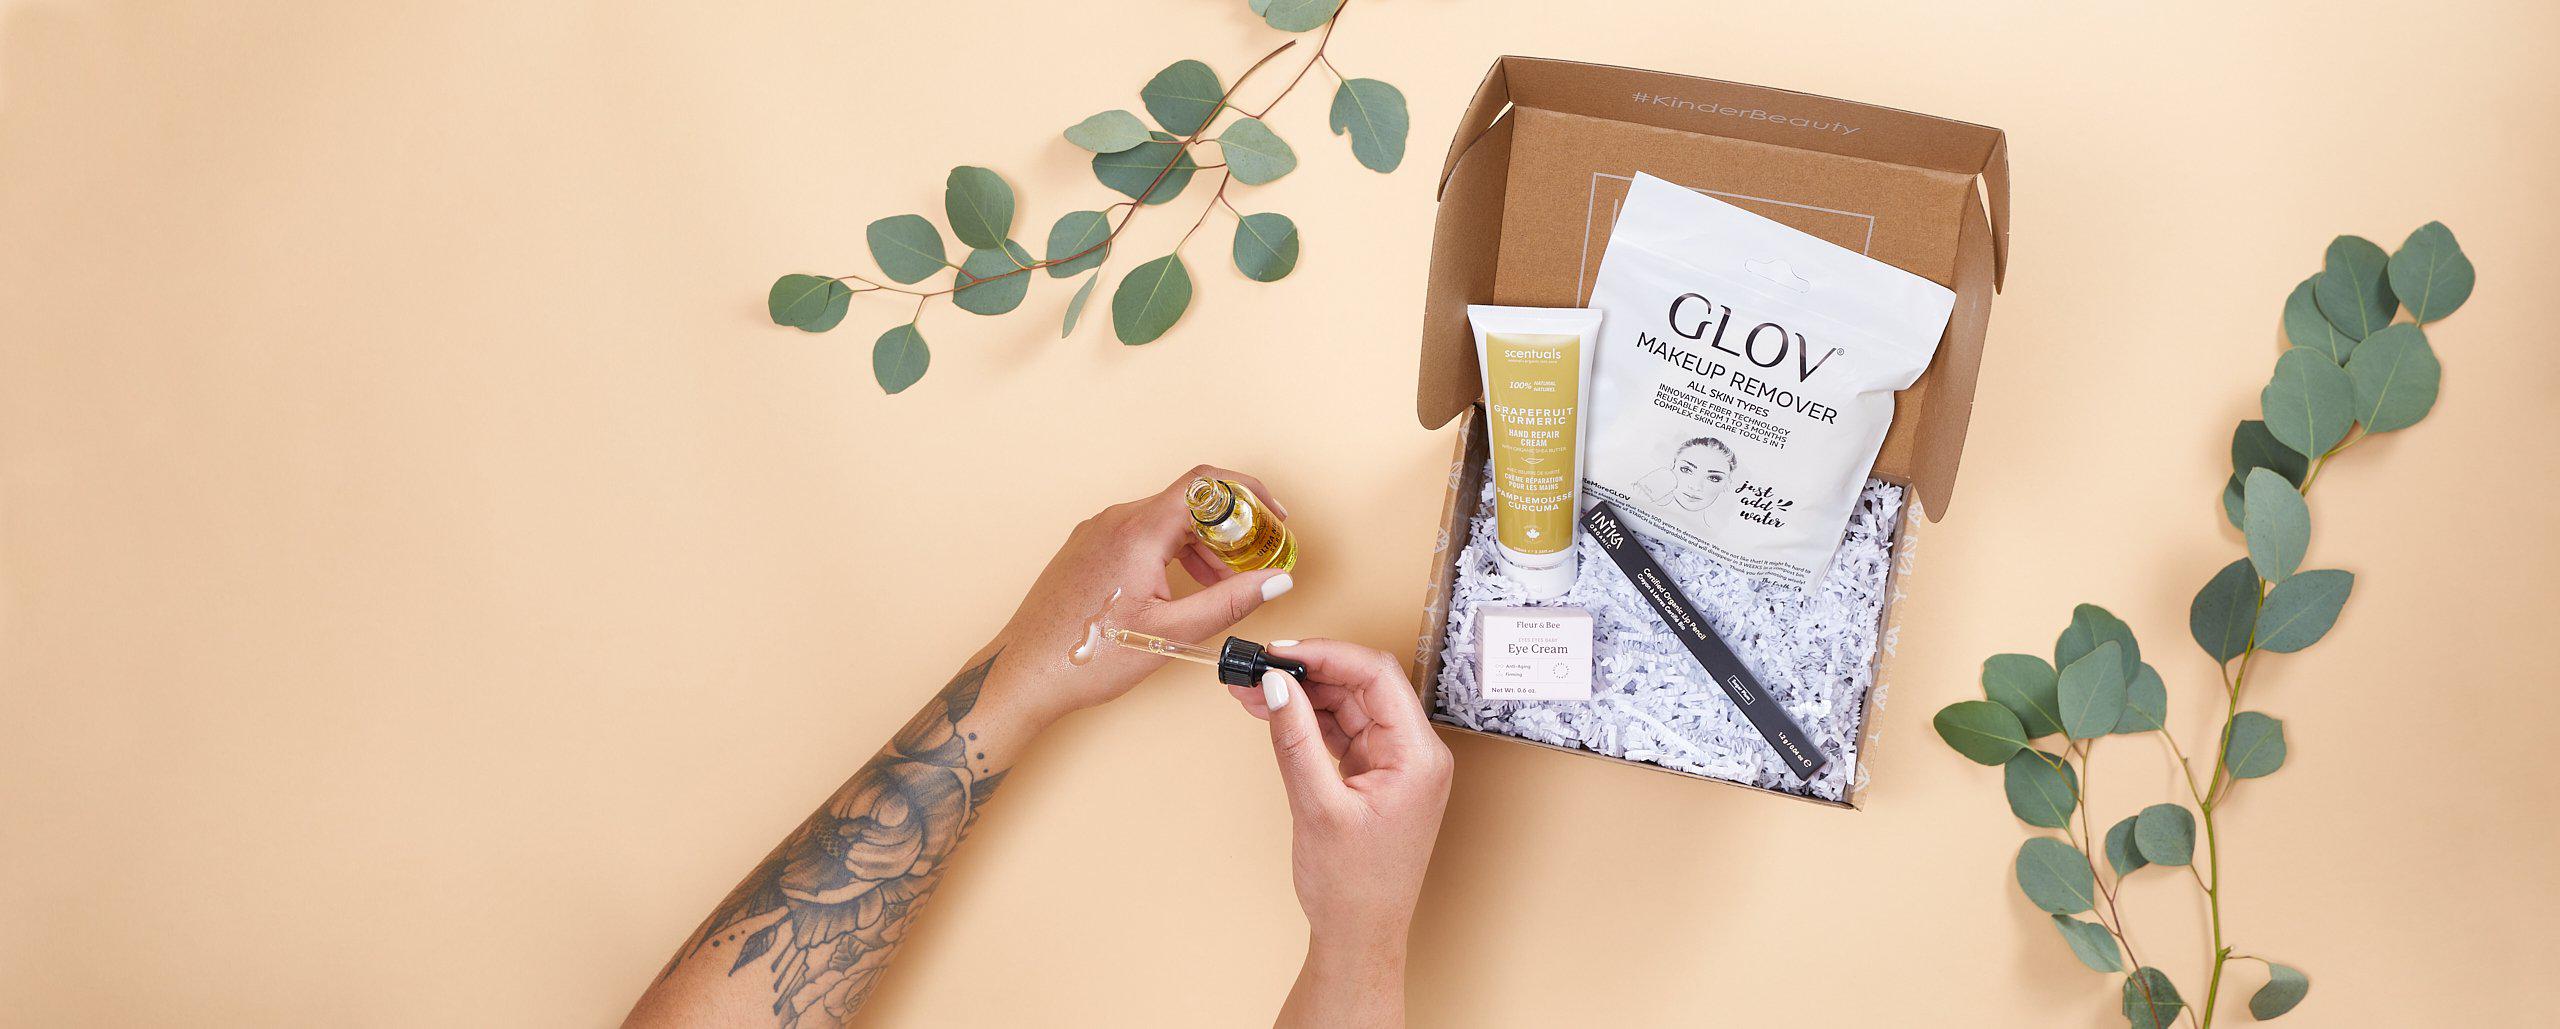 Image of two hands (one tattooed) opening a Kinder Beauty box with lots of clean, vegan, cruelty-free beauty products in the box.